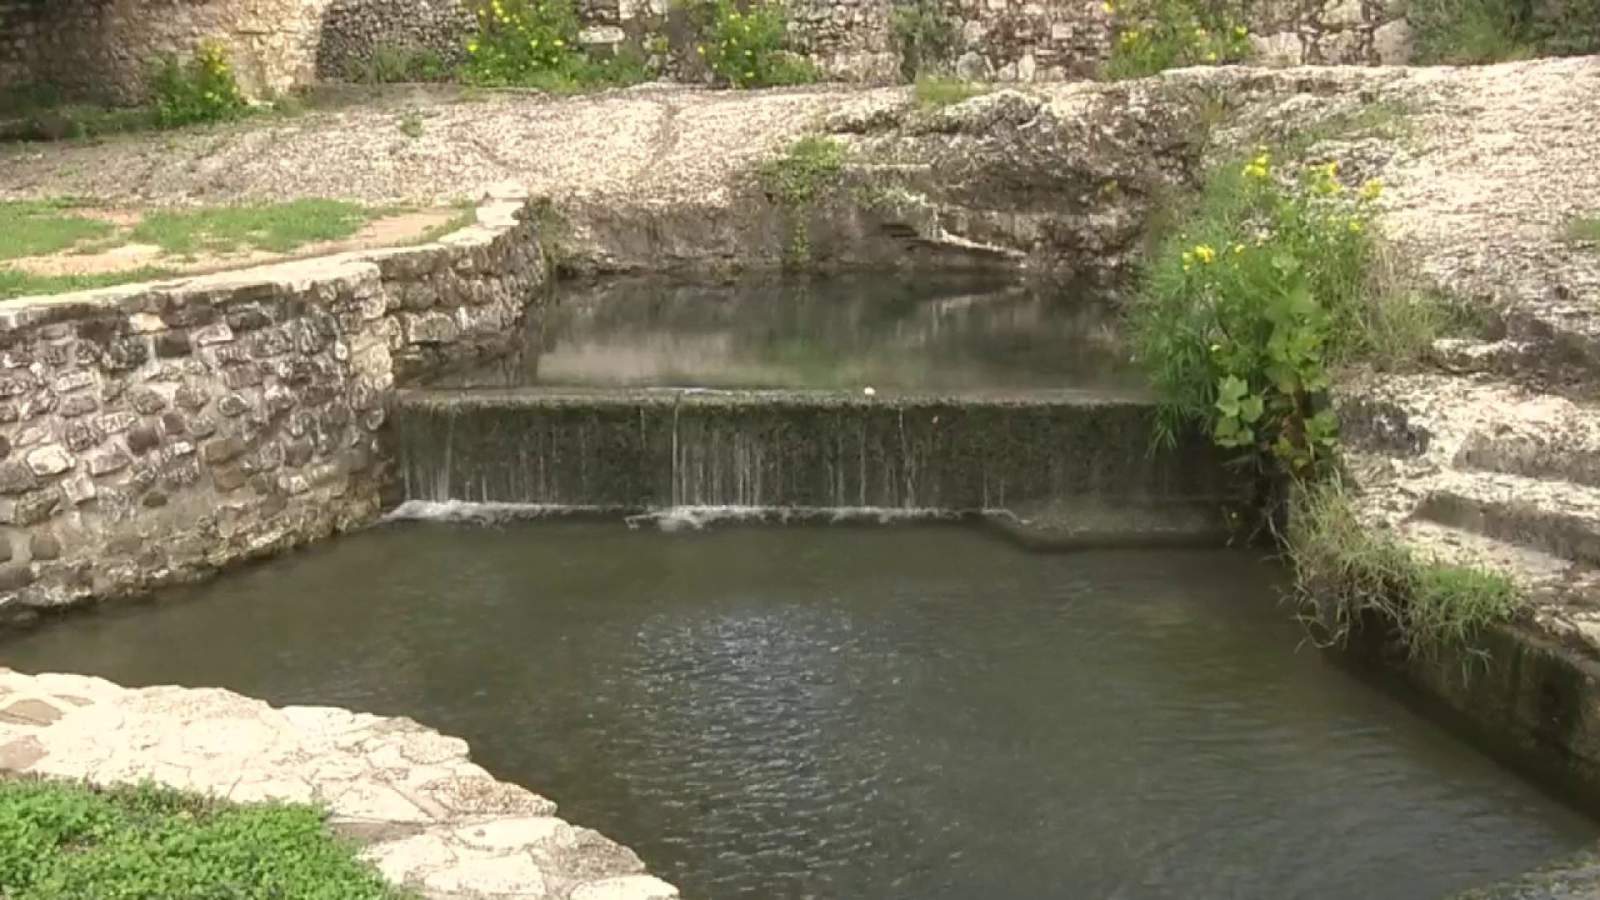 San Antonio City Council members want concrete plans to keep aquifer protection funding flowing